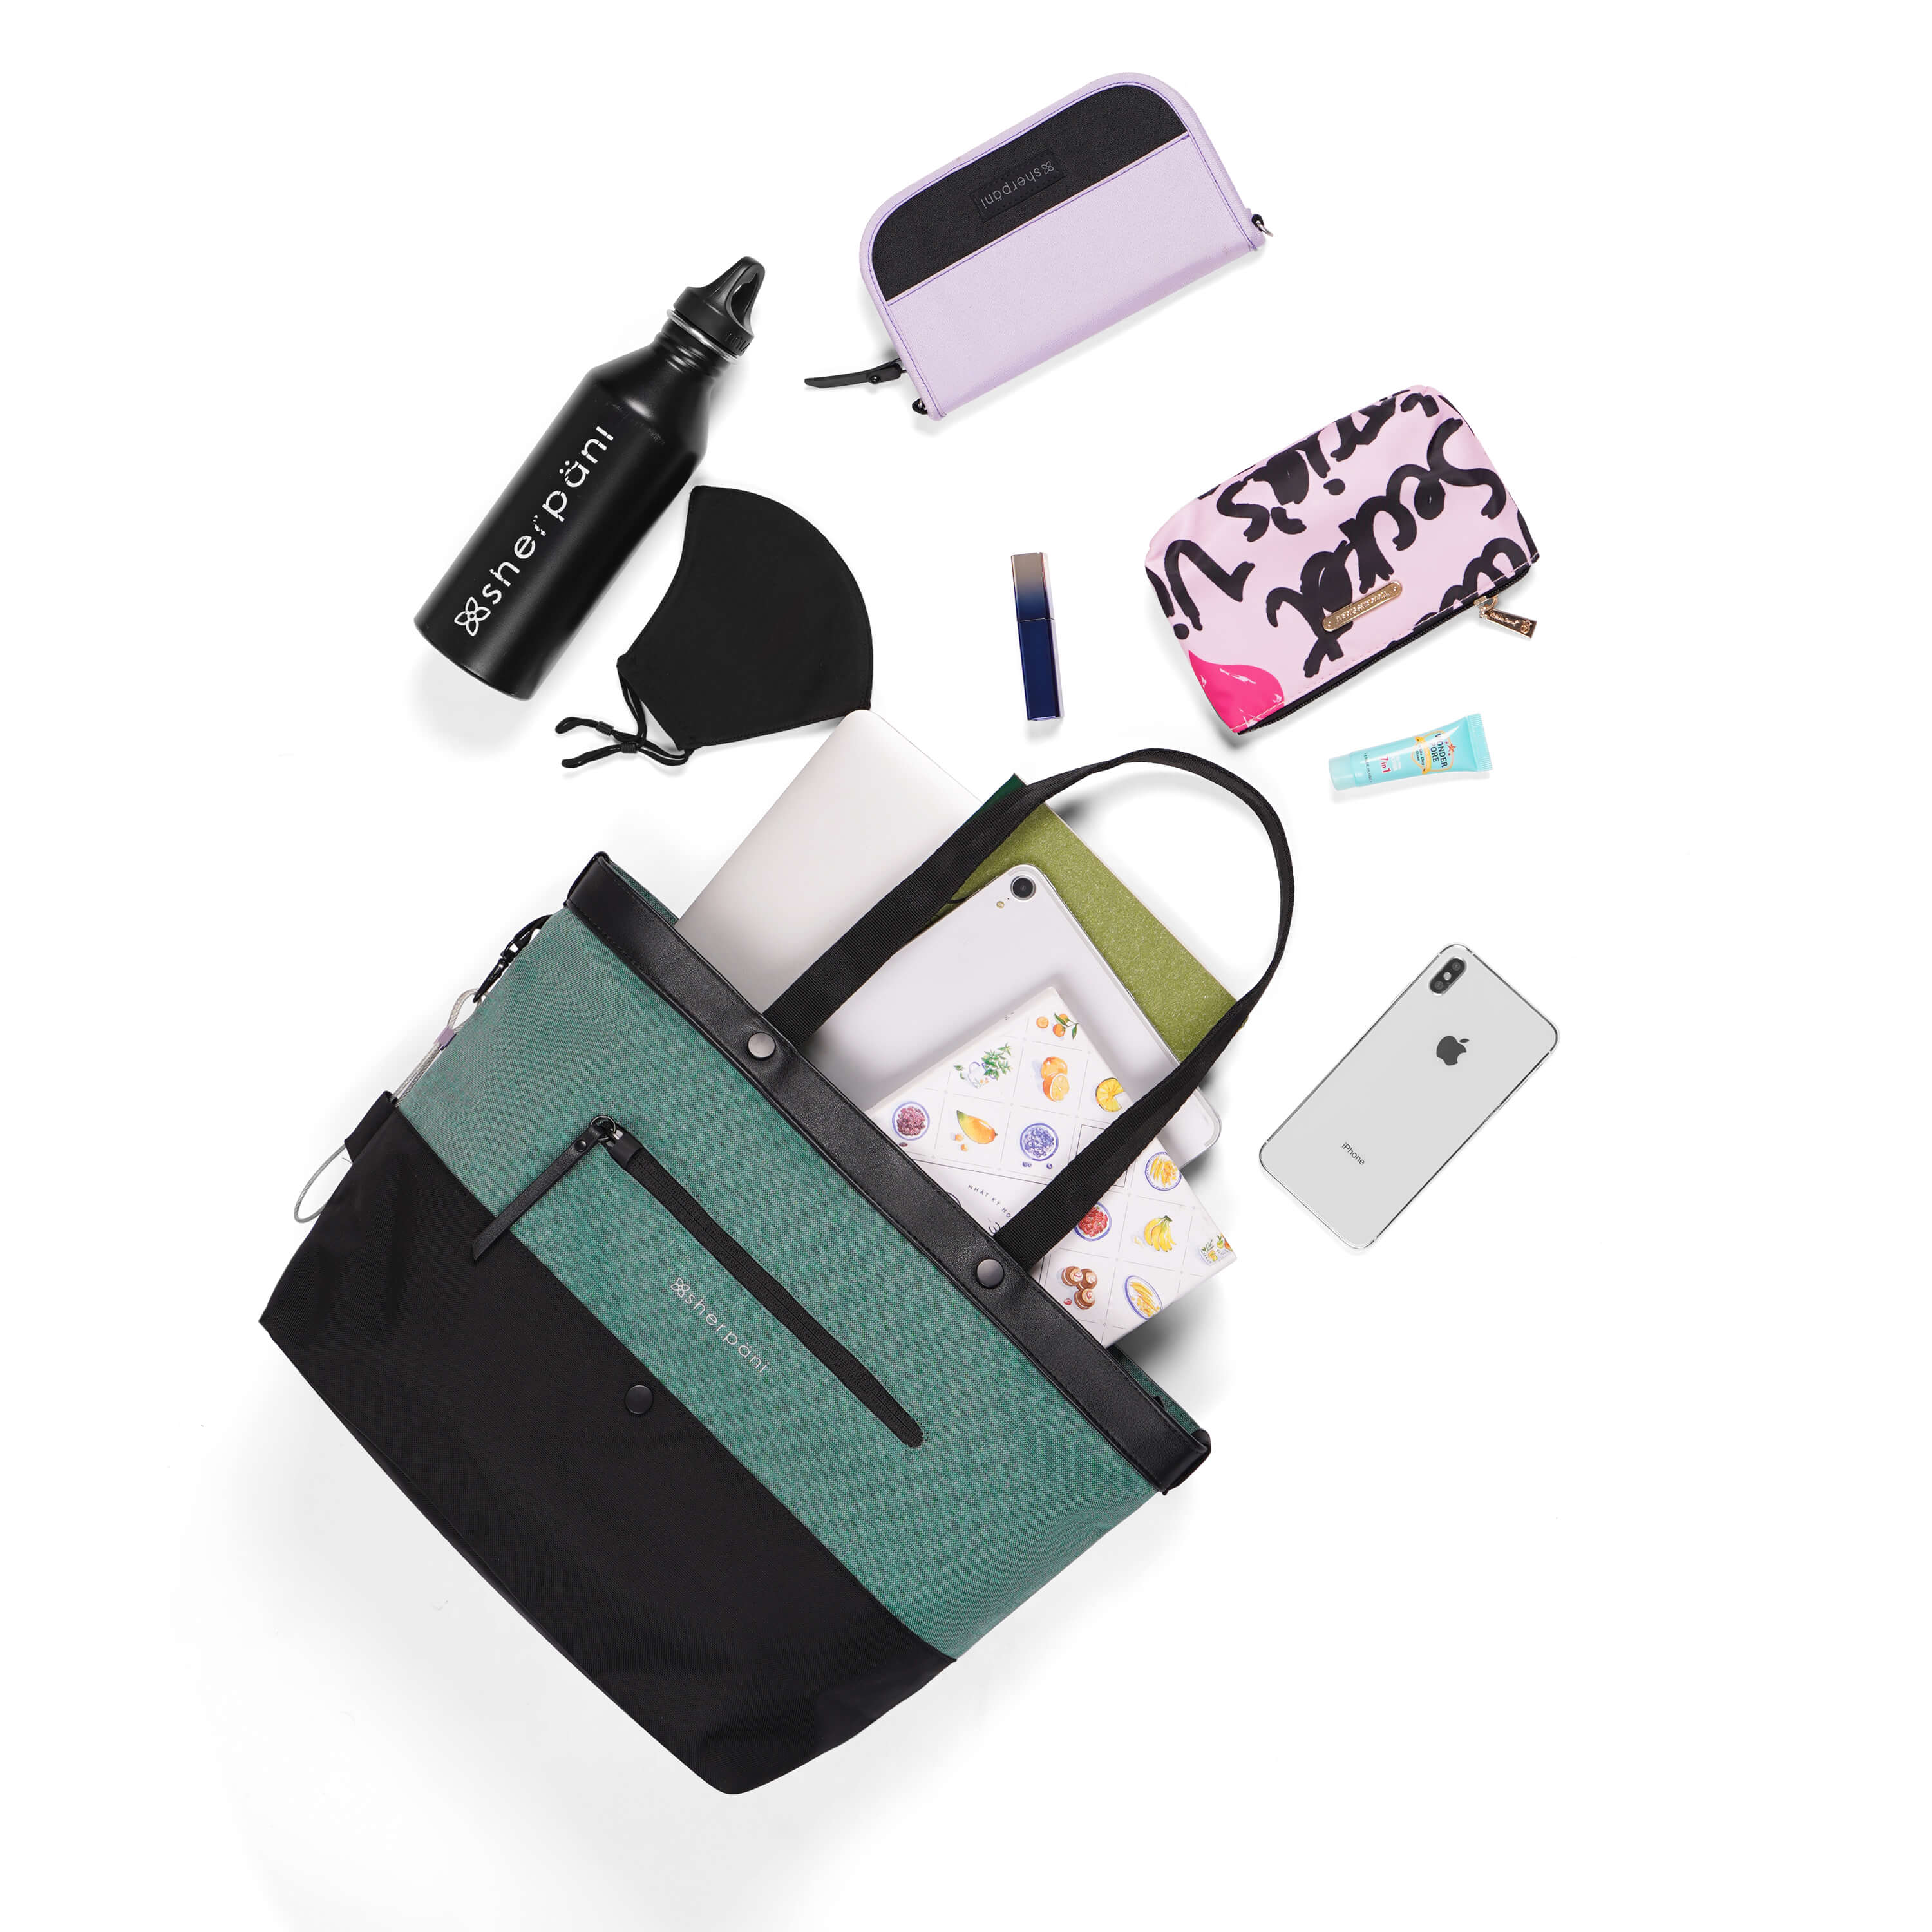 Top view of example items to fill the bag. Sherpani’s Anti-Theft bag, the Cali AT in Teal, lies in the center. It is surrounded by an assortment of items: book, tablet, notepad, laptop, mask, water bottle, Sherpani wallet, lipstick, makeup pouch, hand lotion, and phone. 